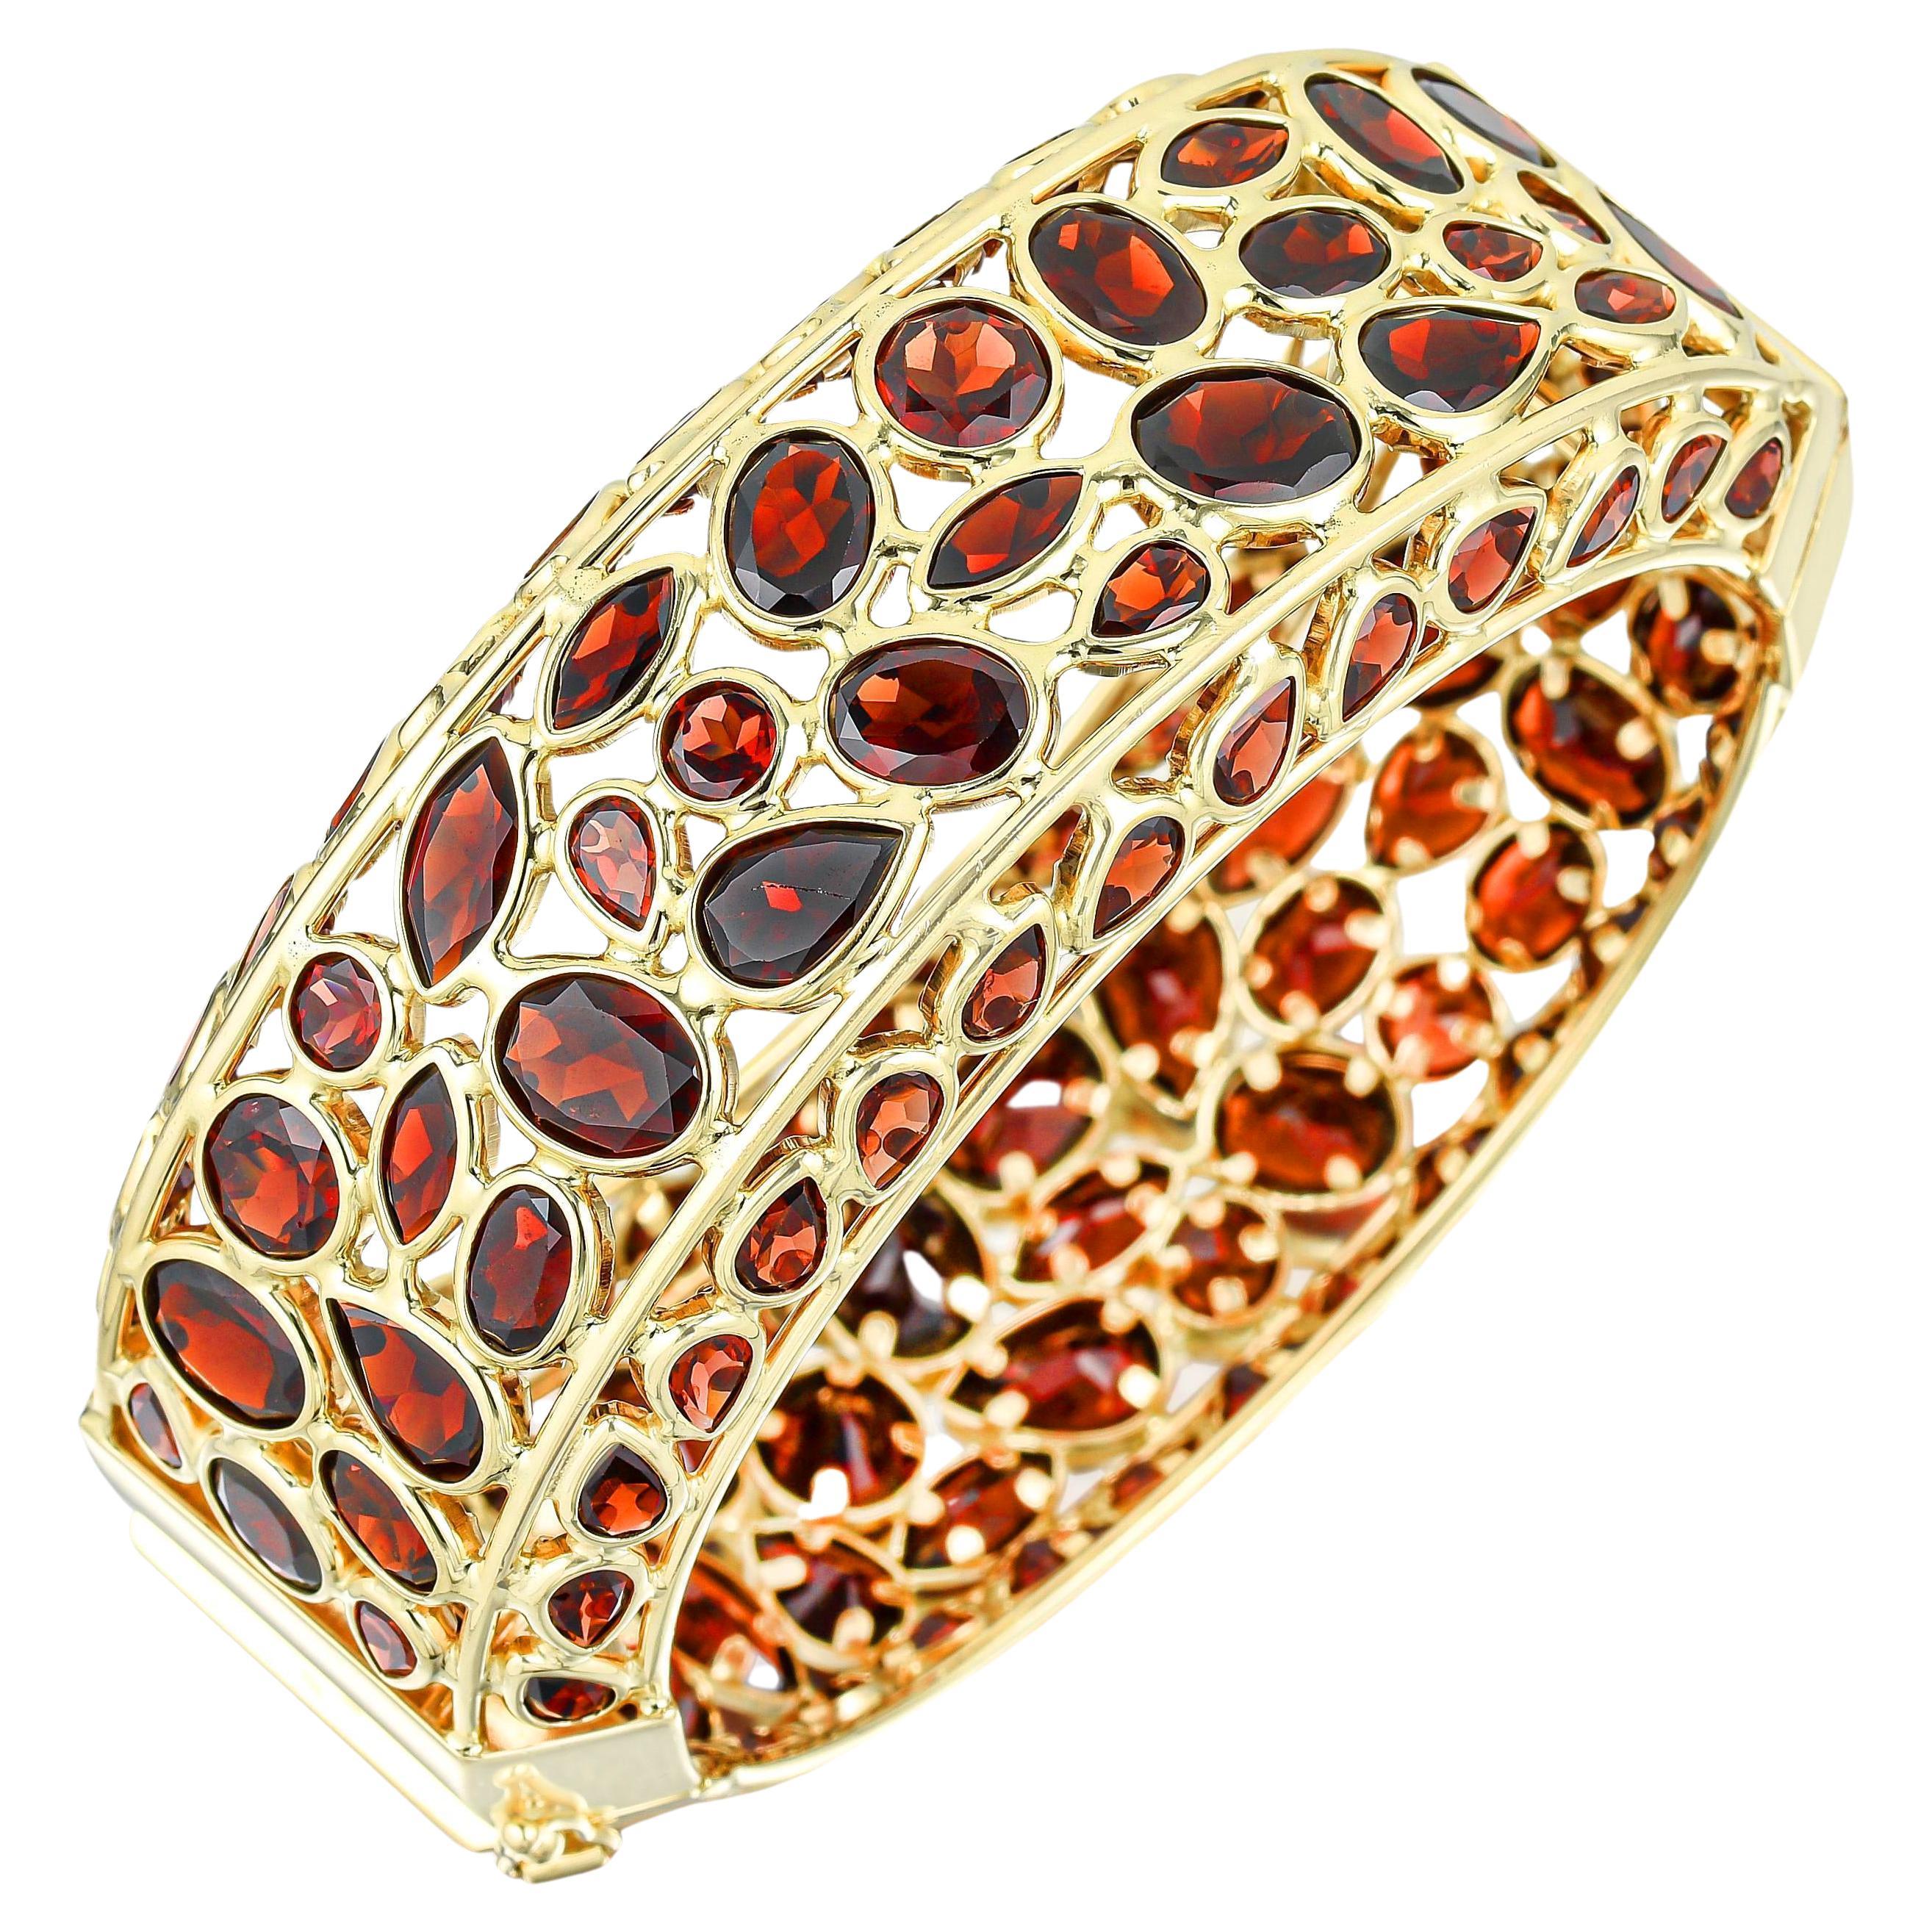 It comes with the Gemological Appraisal by GIA GG/AJP
All Gemstones are Natural
Red Garnets= 100 Carats
Cut: Mixed
Metal: 14K Yellow Gold
Bracelet Length: 7 Inches
Bracelet can be opened on a side